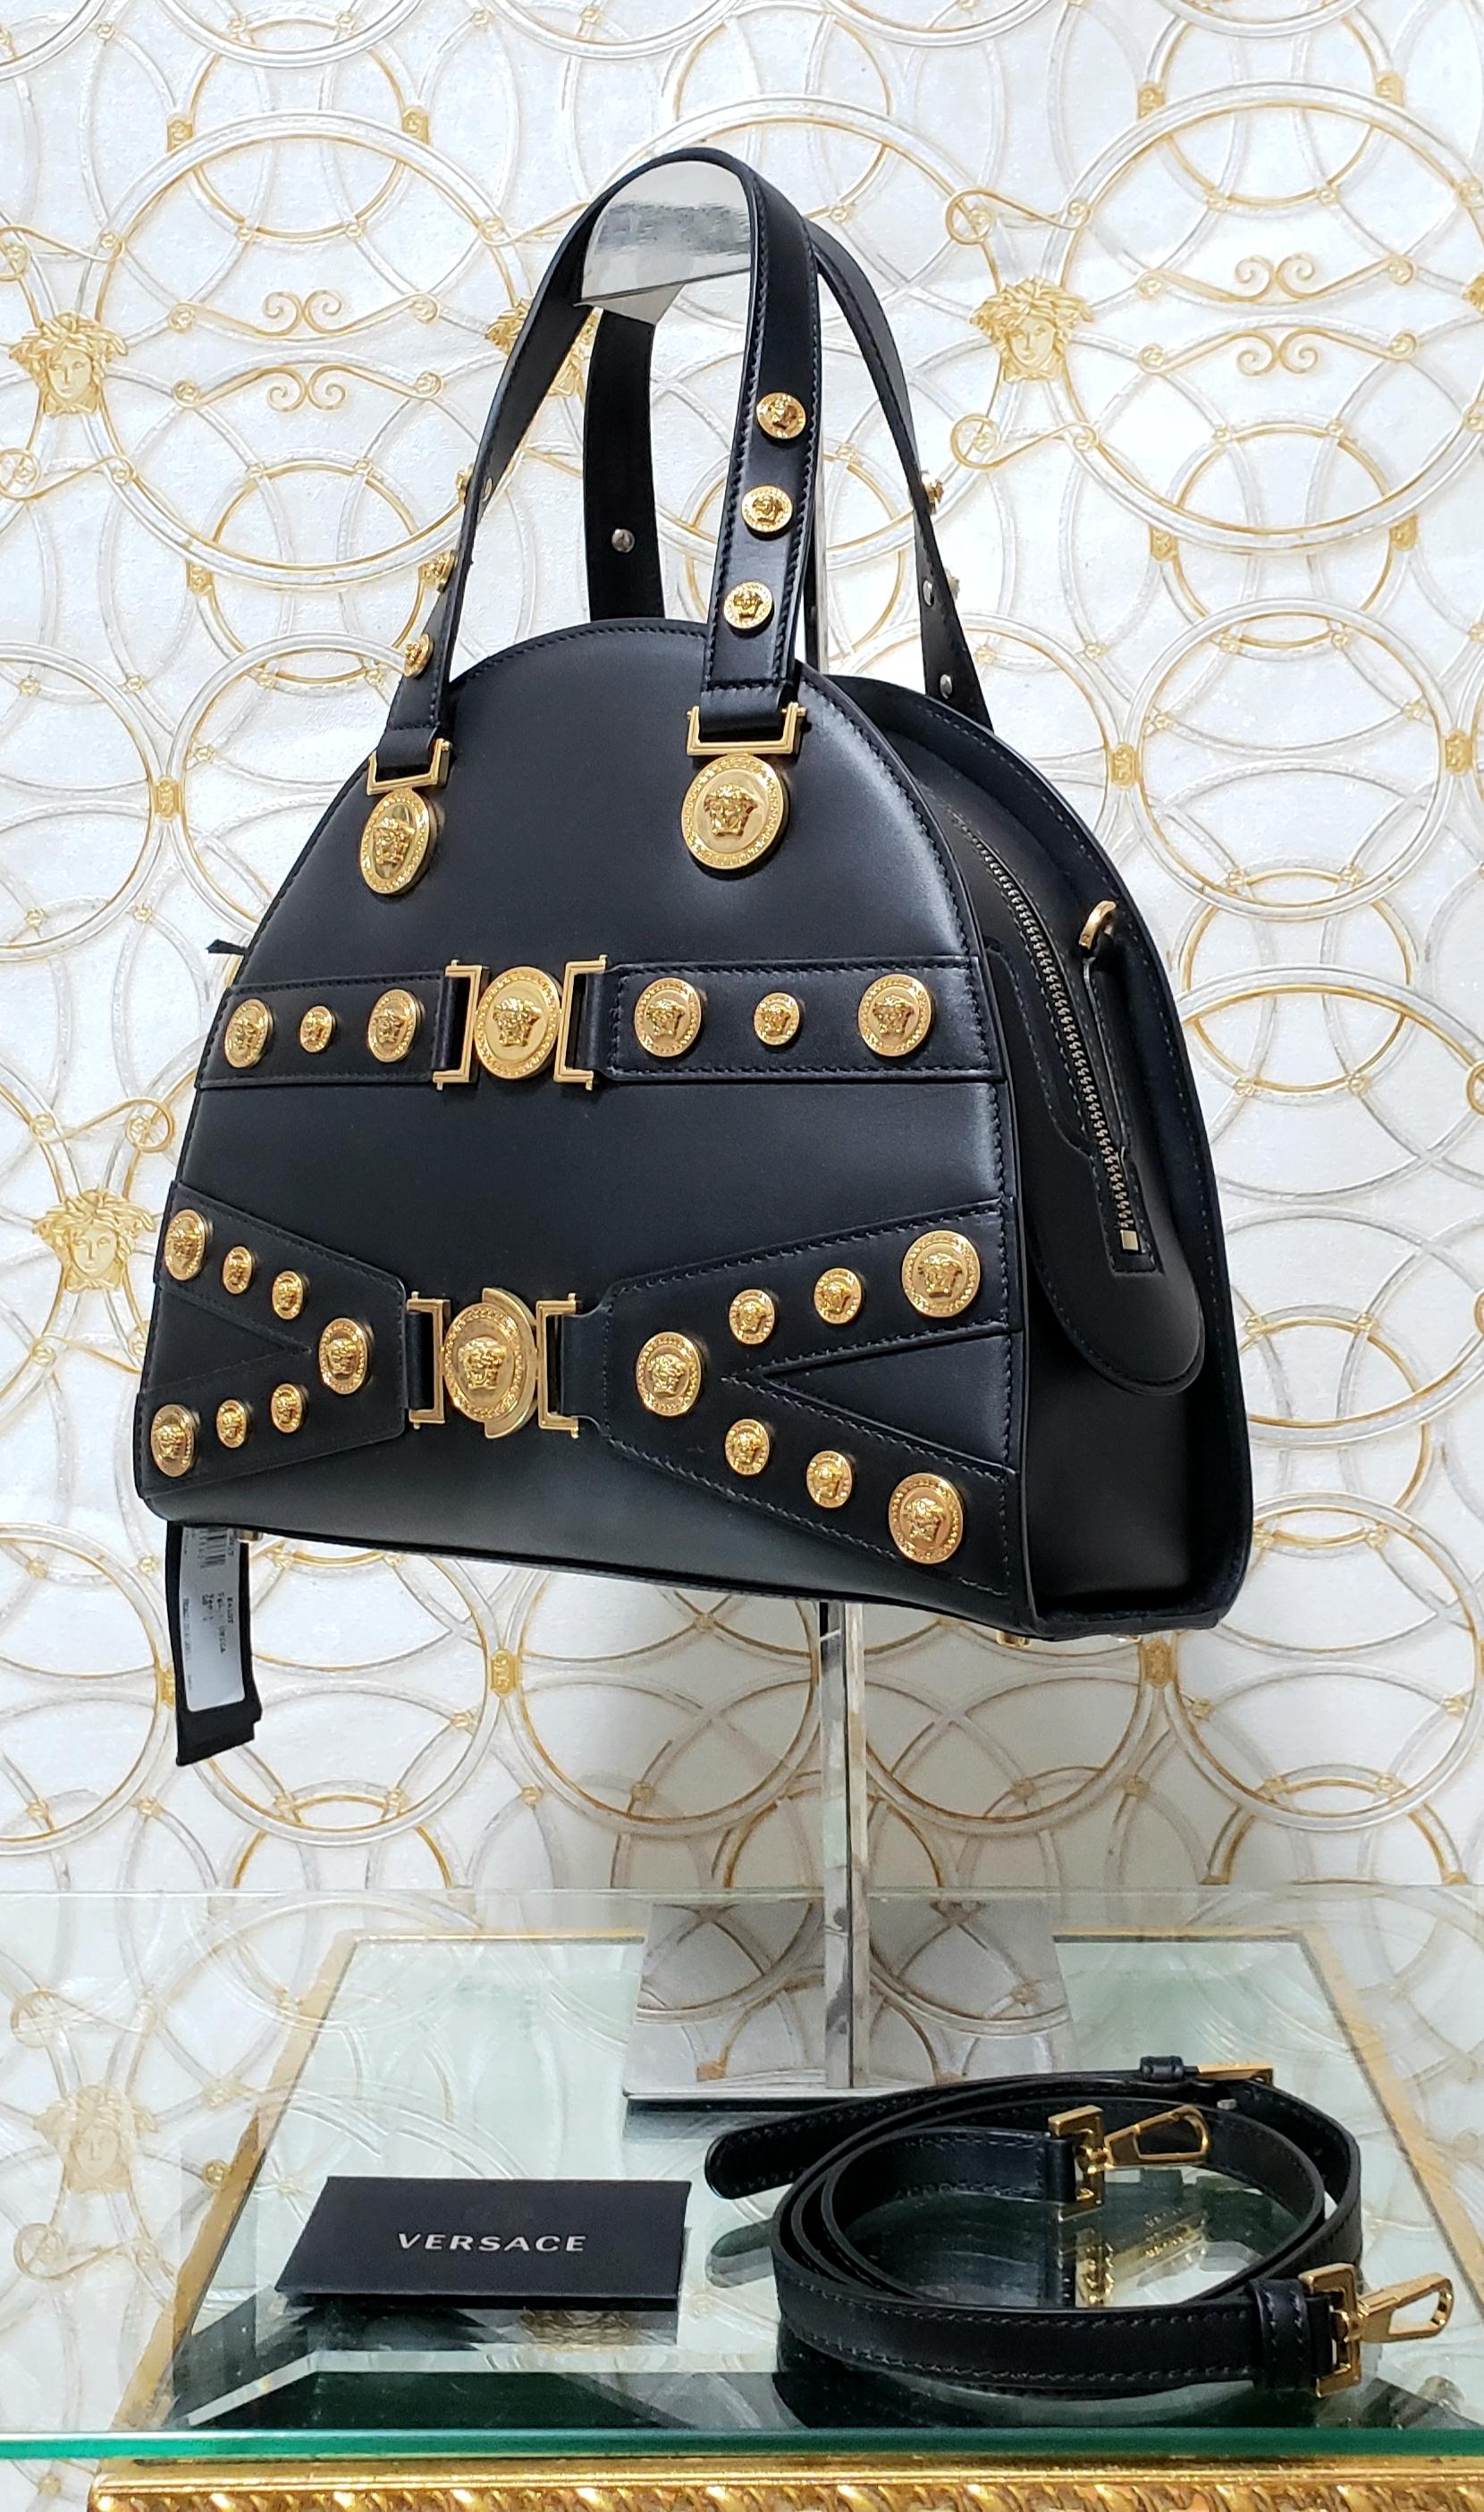 VERSACE 


GIANNI VERSACE TRIBUTE BLACK LEATHER MEDALLION BAG

Versace is one of the most renowned Italian fashion labels. 

Its first boutique was opened in Milan in 1978 and the name Versace quickly became a synonym for luxury and refined taste.

